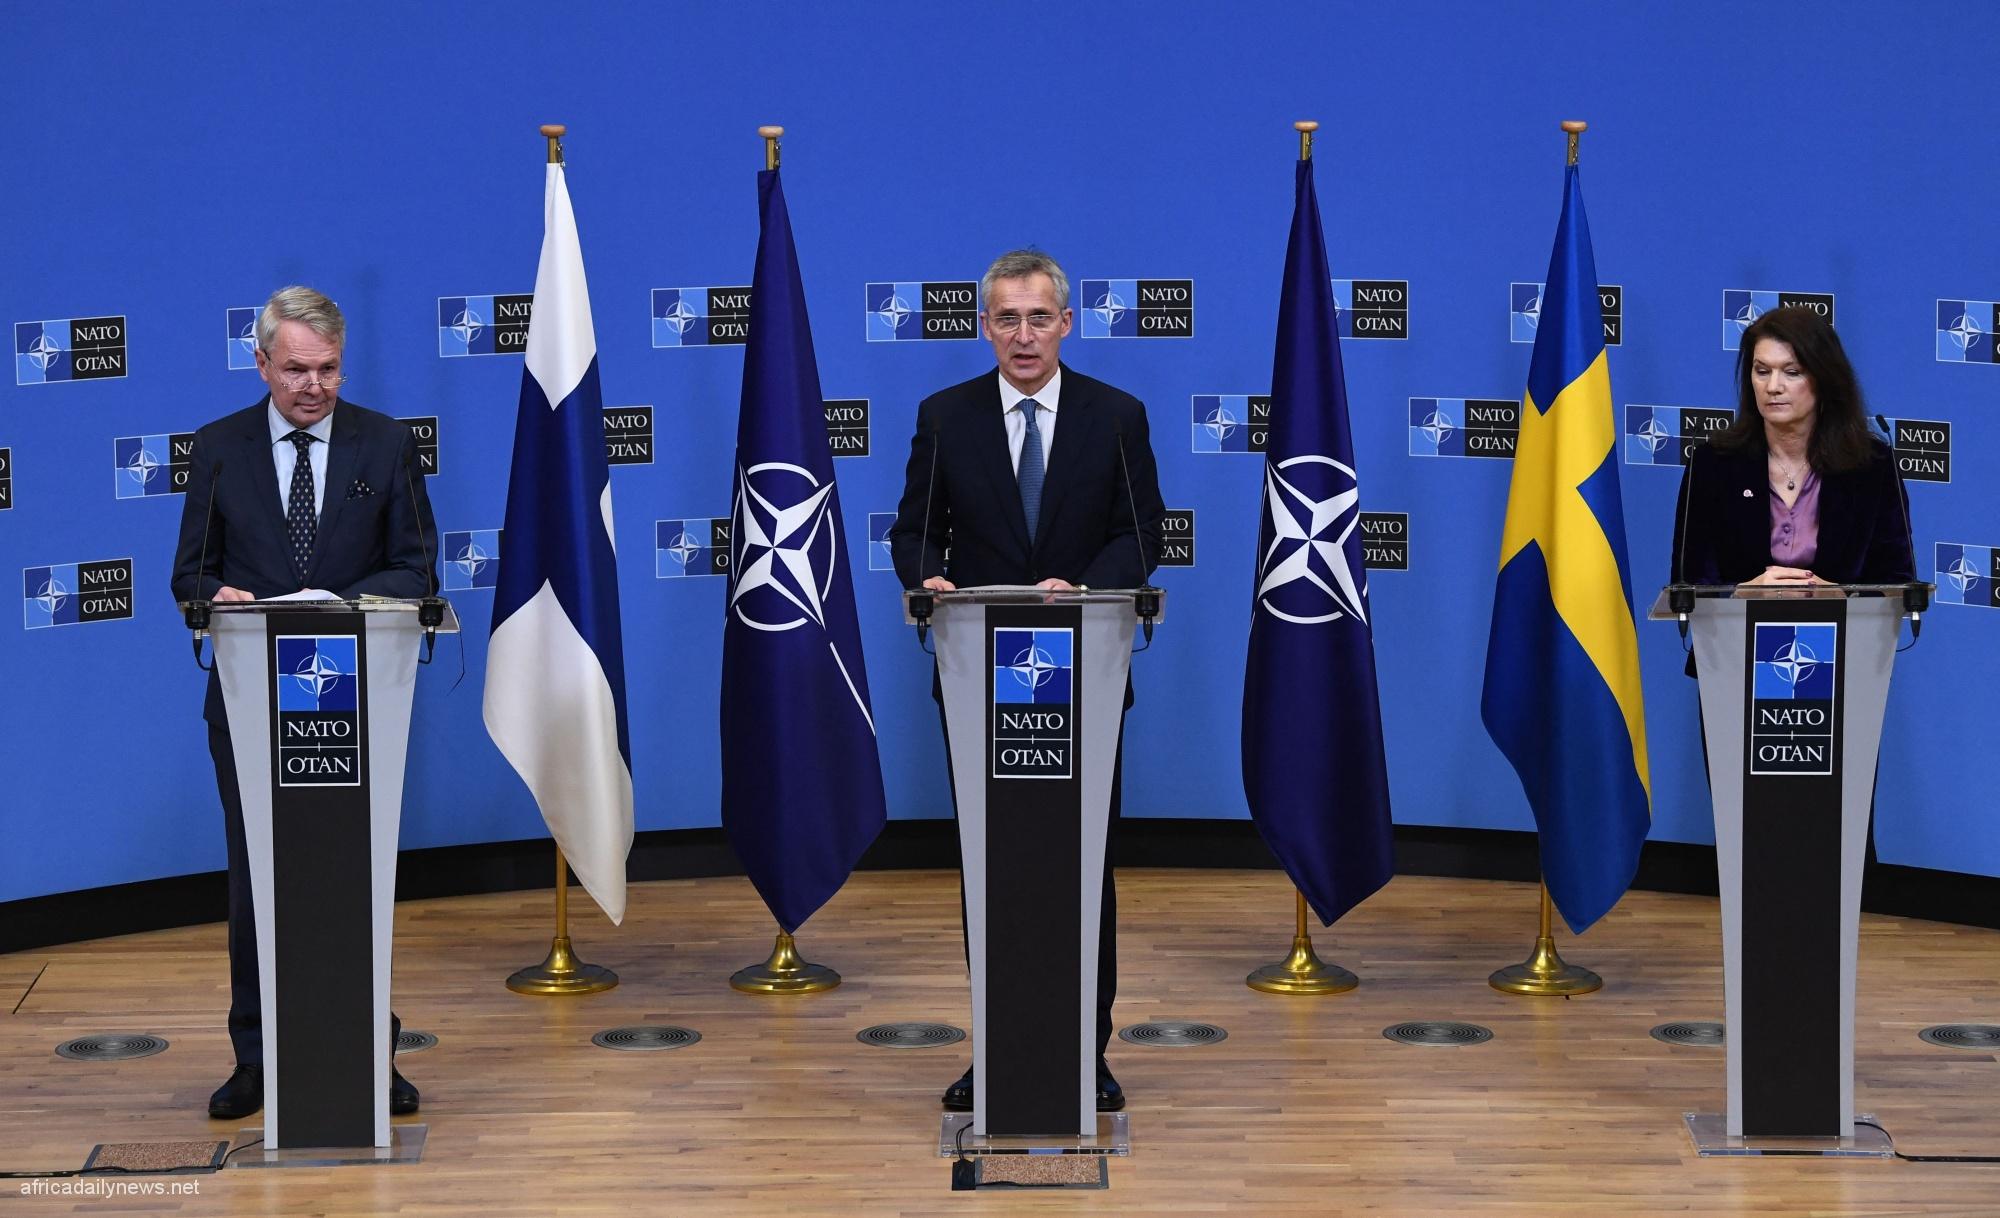 NATO Membership Sweden, Finland To Submit Bids Today